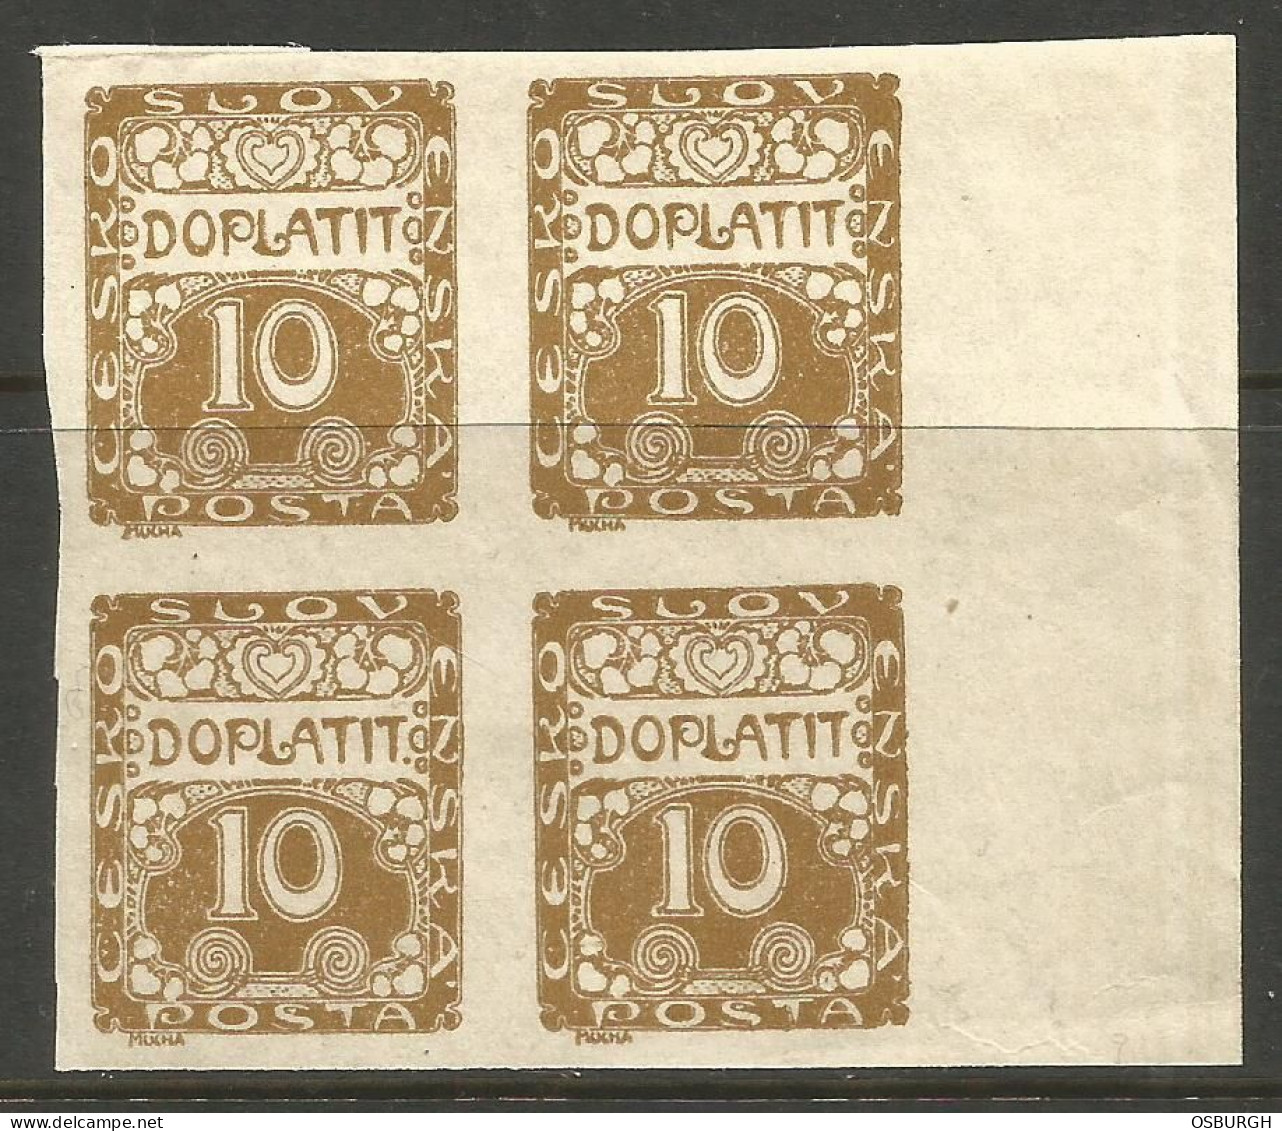 CZECHOSLOVAKIA. 10h IMPERF POSTAGE DUE MARGINAL BLOCK OF FOUR. MOUNTED MINT. - Strafport